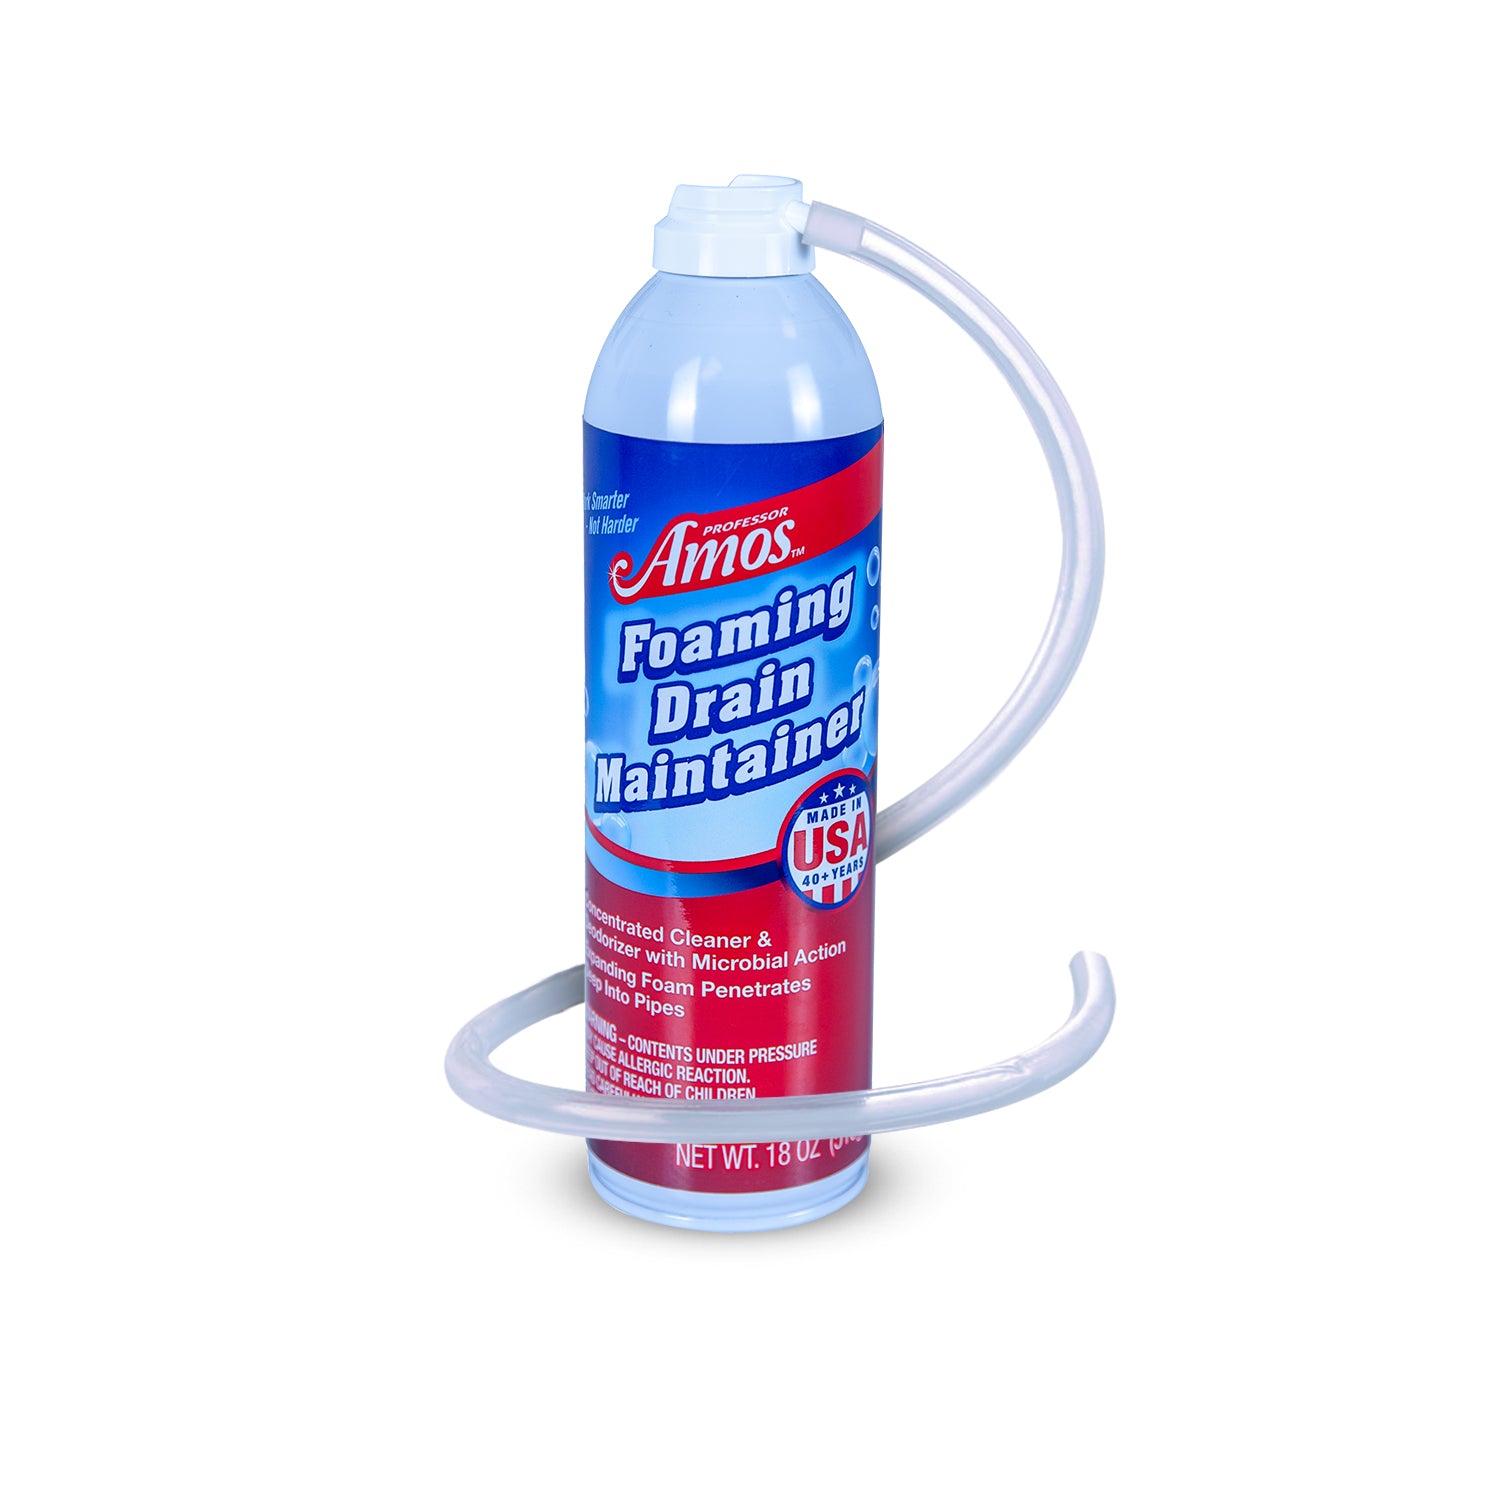 Fast Foaming Drain Maintainer